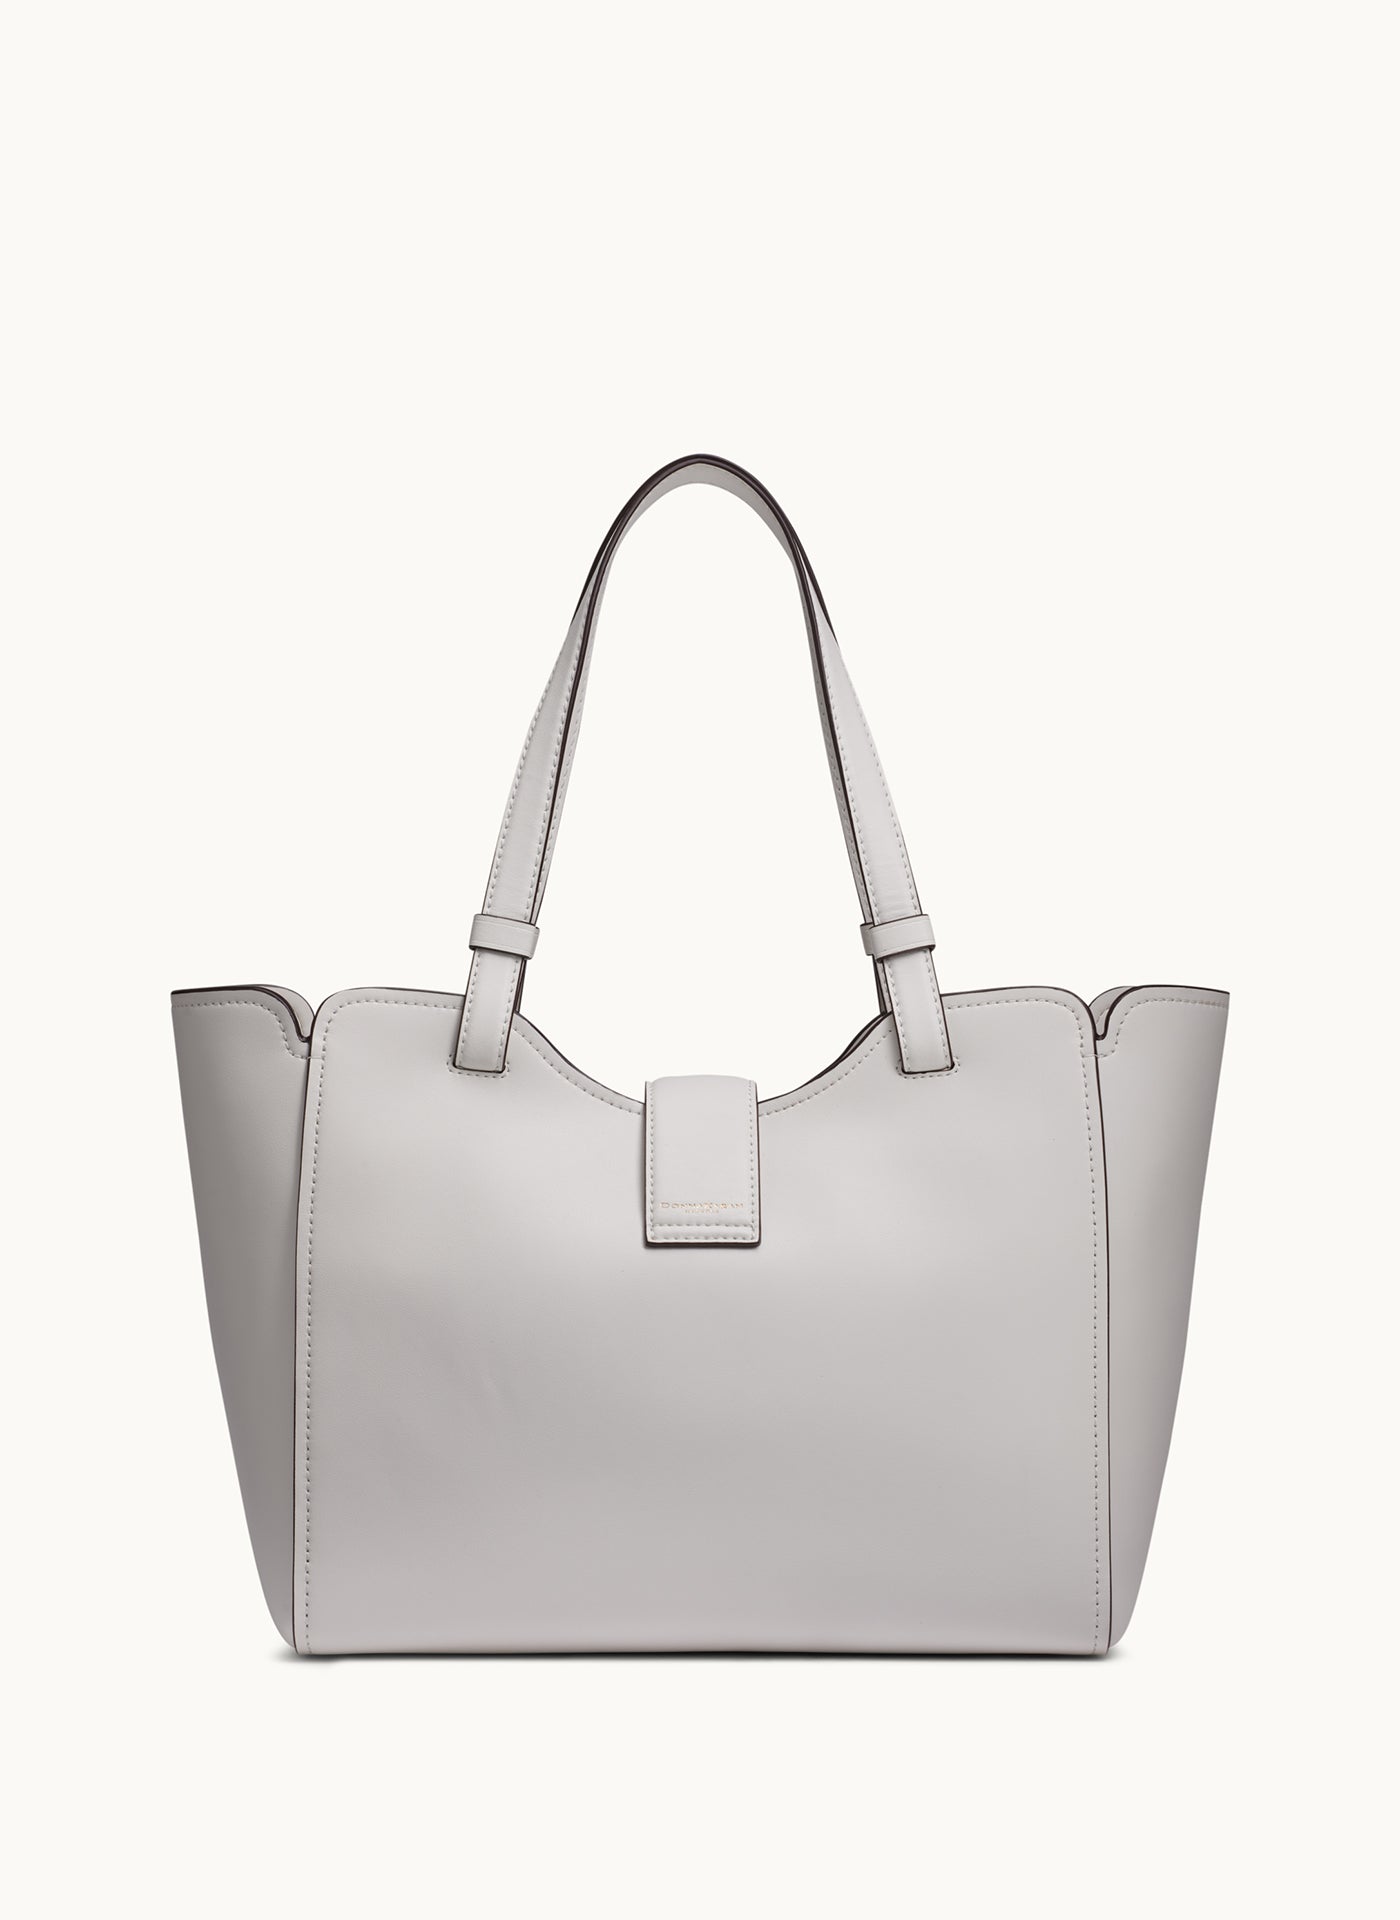 VALLEY STREAM TOTE